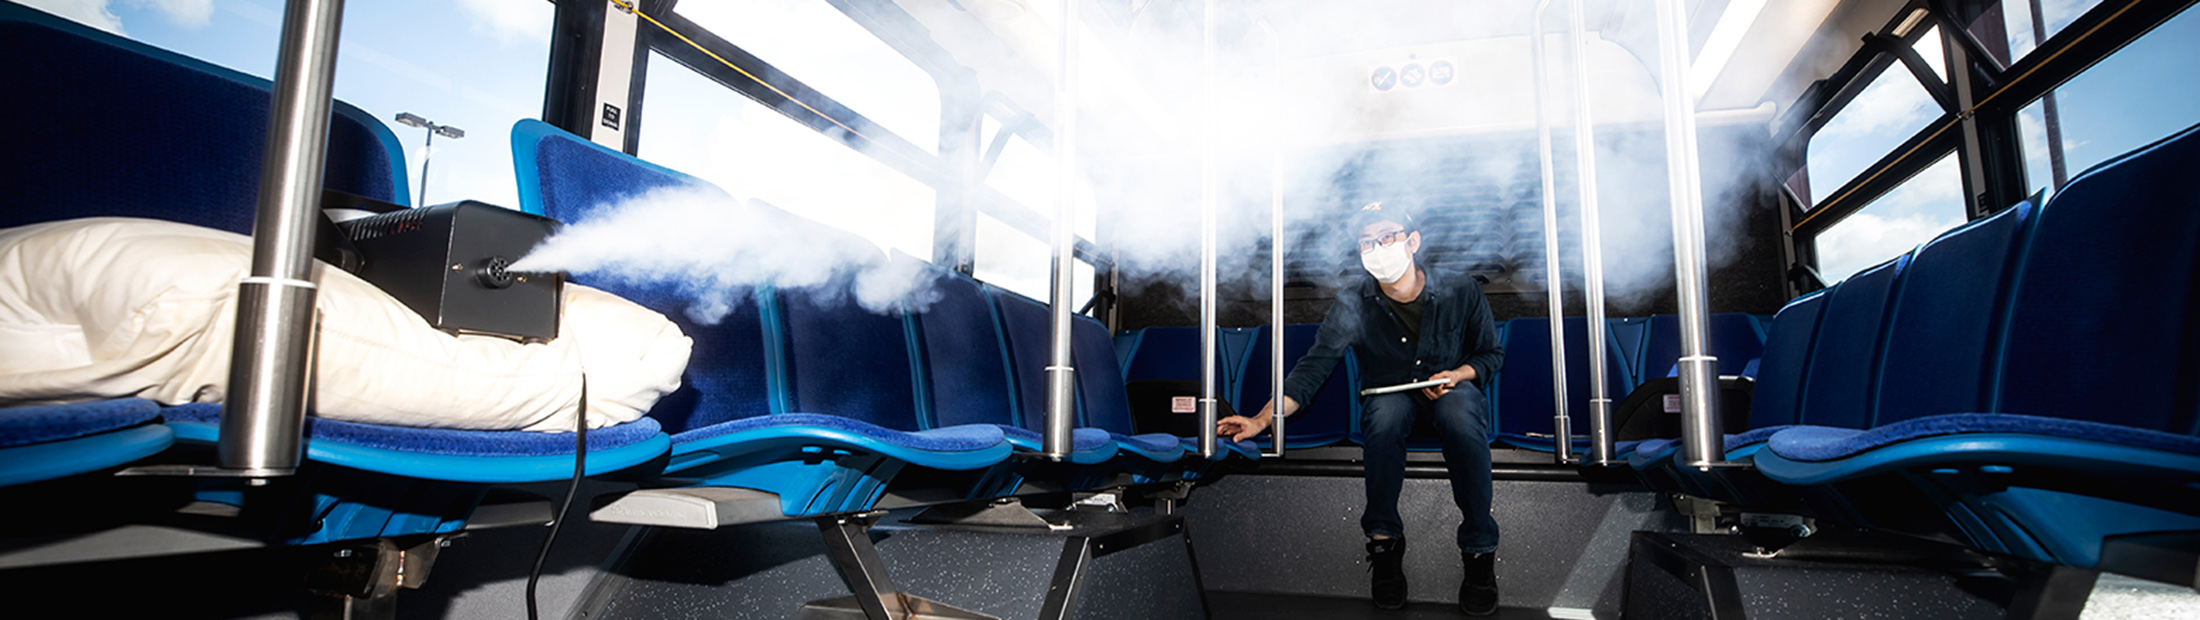 A man in a blue bus controlling a device releasing a spray.